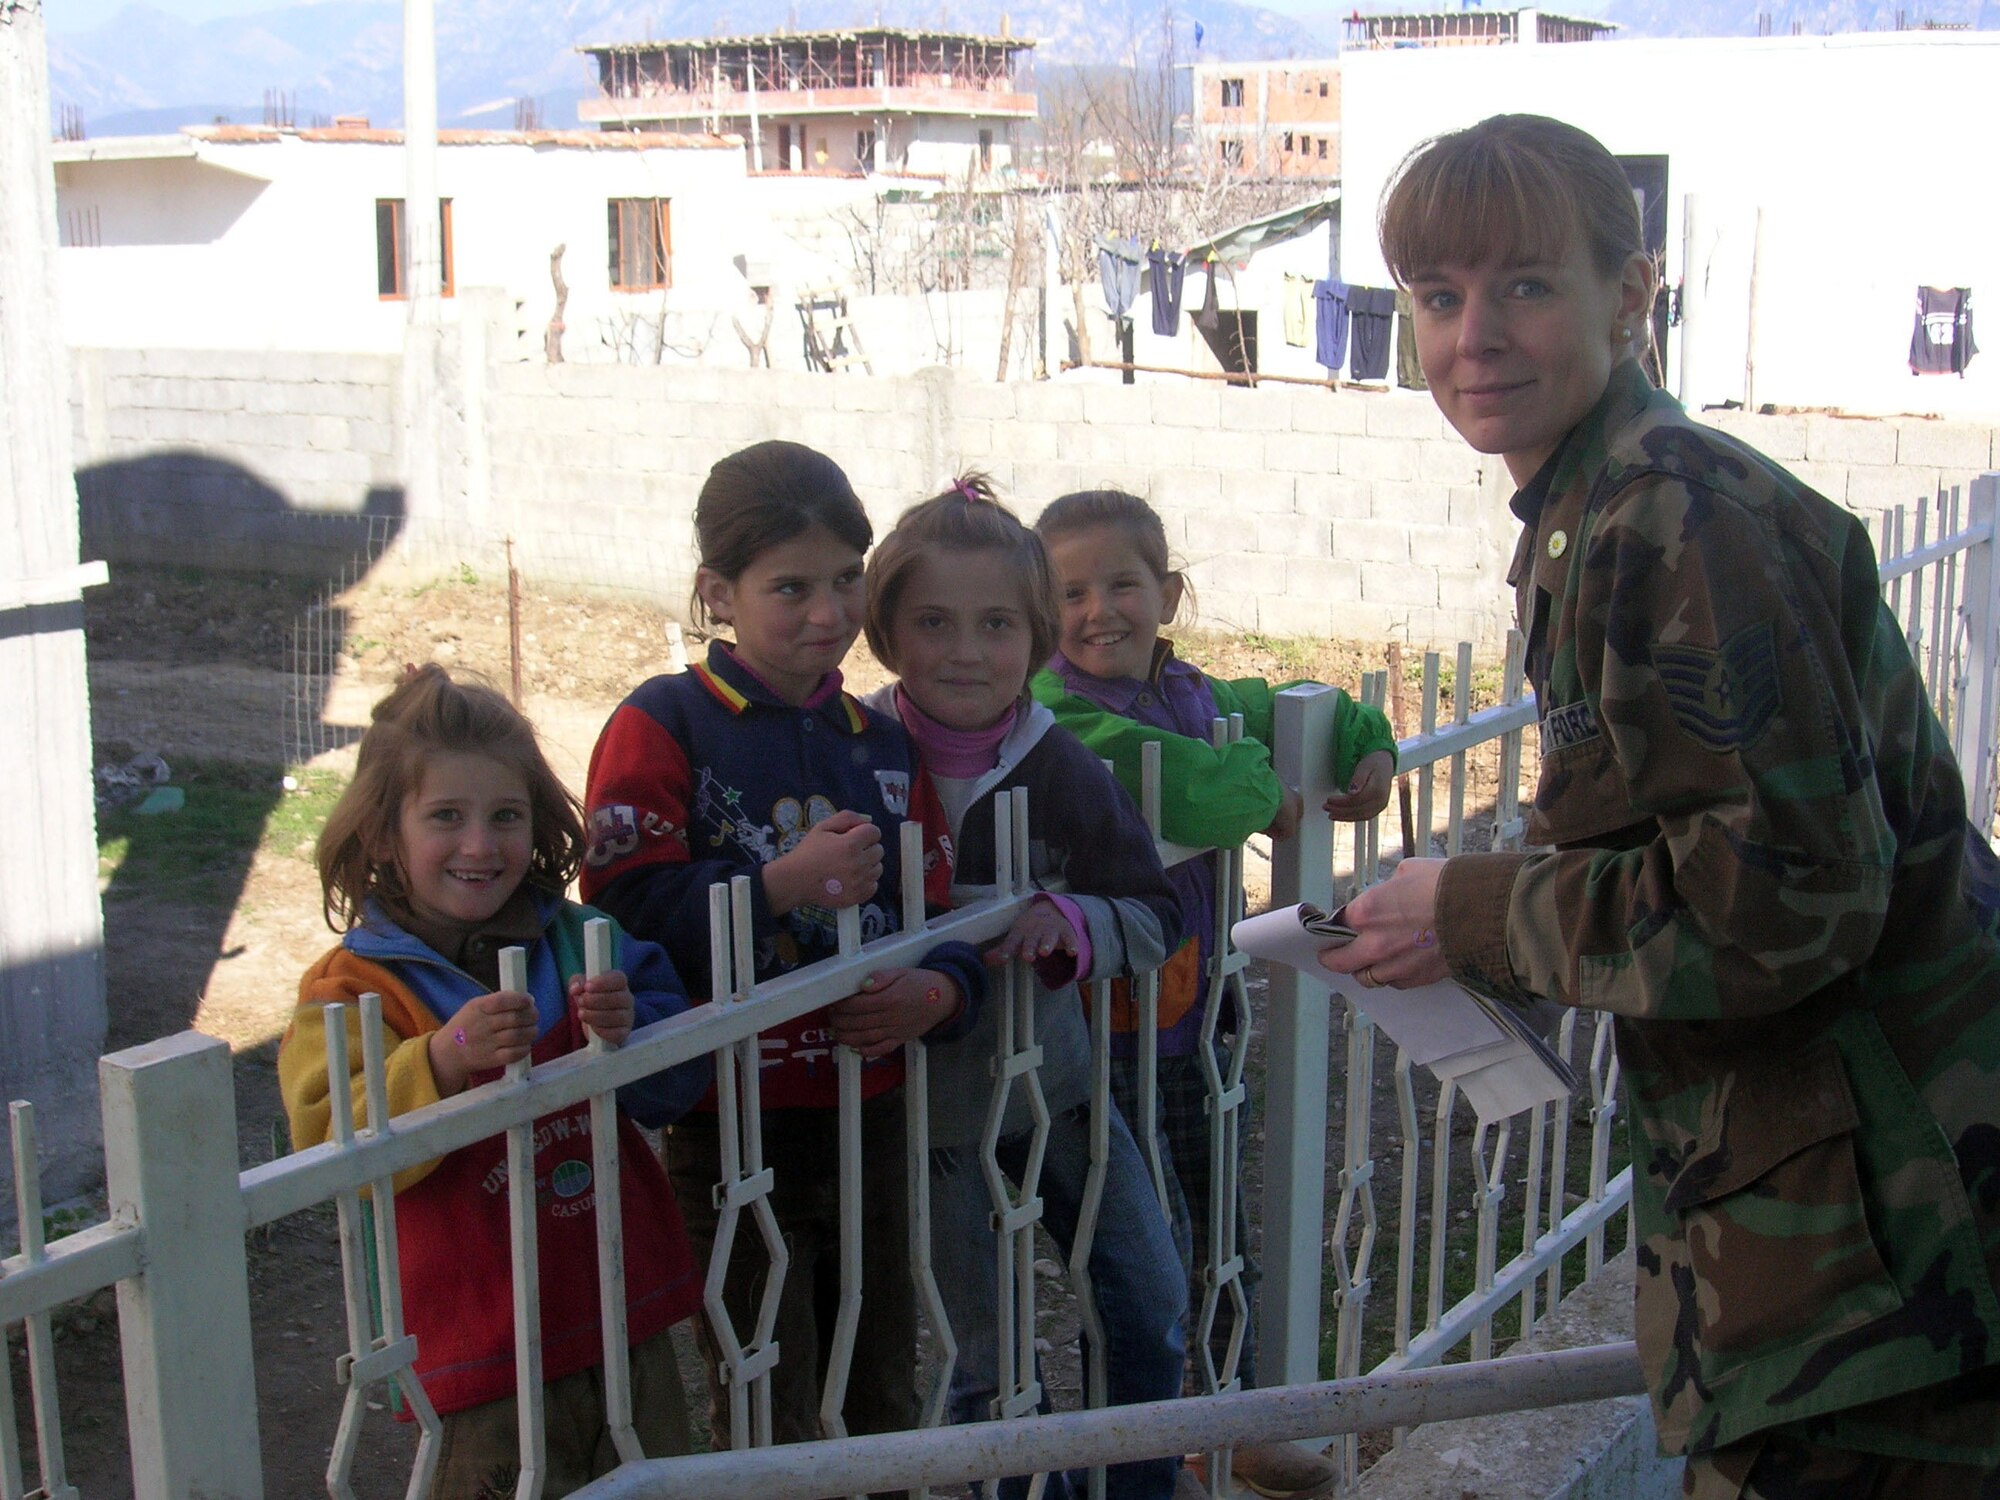 Tech. Sgt. Jacqueline Sweet-McNeil visits with children in February in Albania. Sergeant Sweet-McNeil, along with four other 109th Airlift Wing medics from the Stratton Air National Guard Base in New York, administered 1,000 Hepatitis A shots during a humanitarian mission with the New Jersey National Guard. (Courtesy photo)
